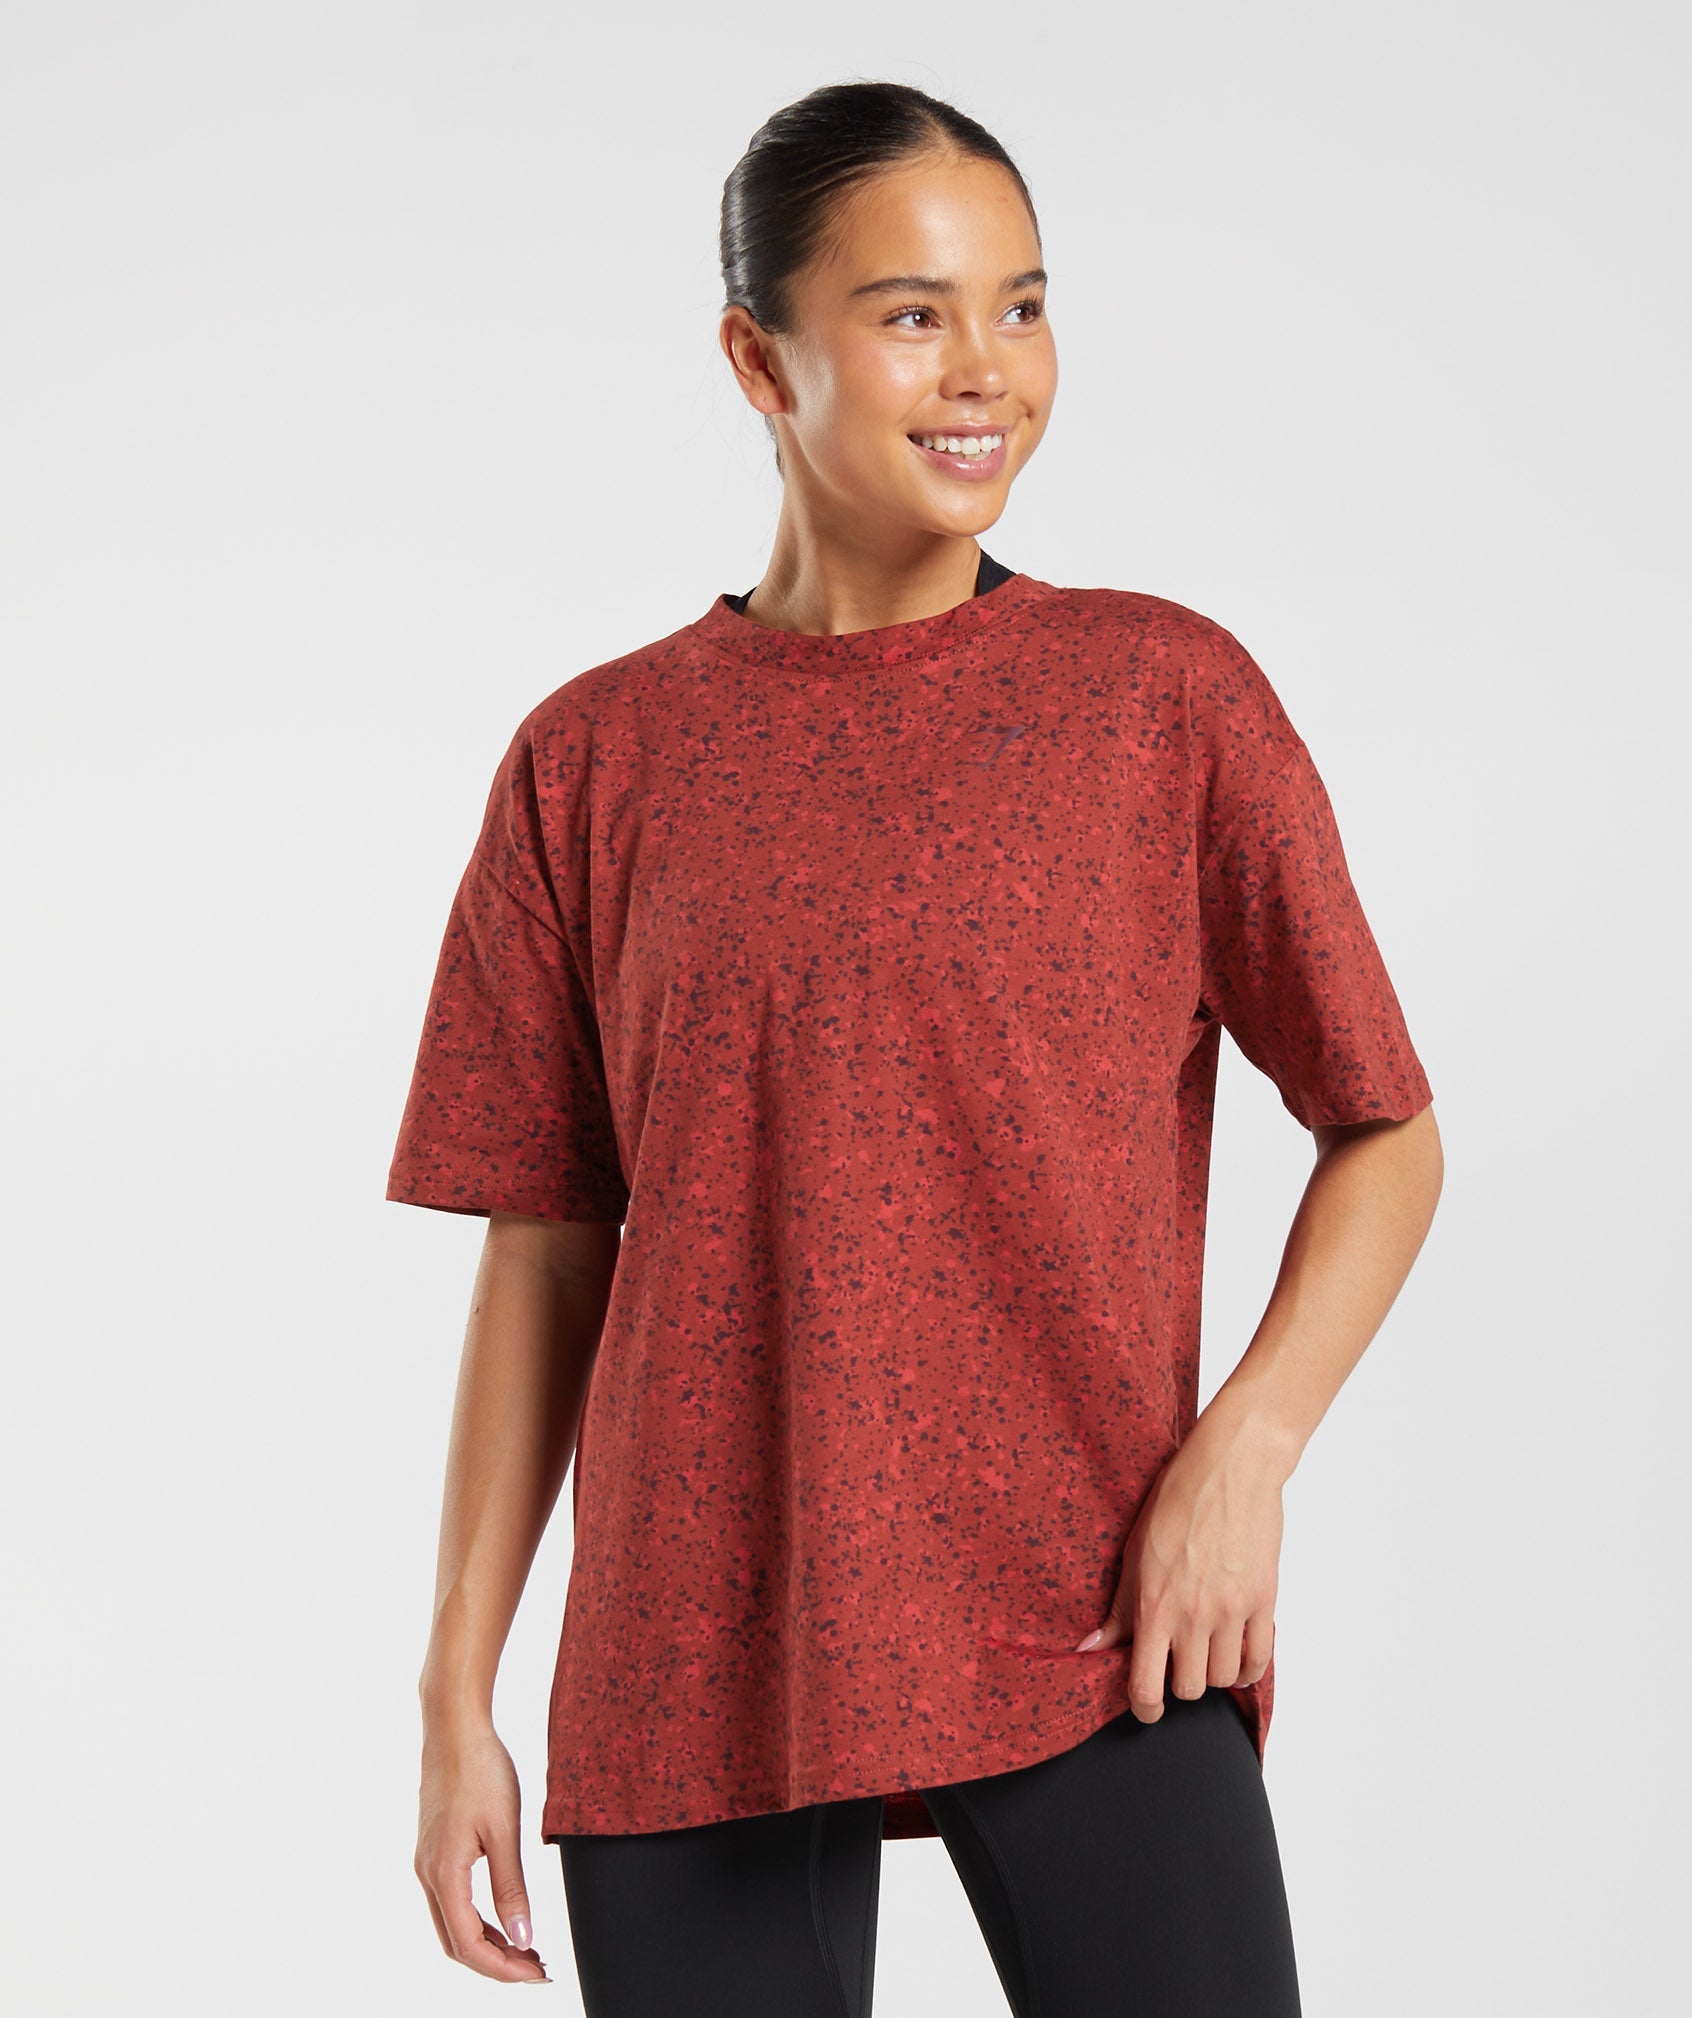 Mineral Print T-Shirt in Rosewood Red - view 1